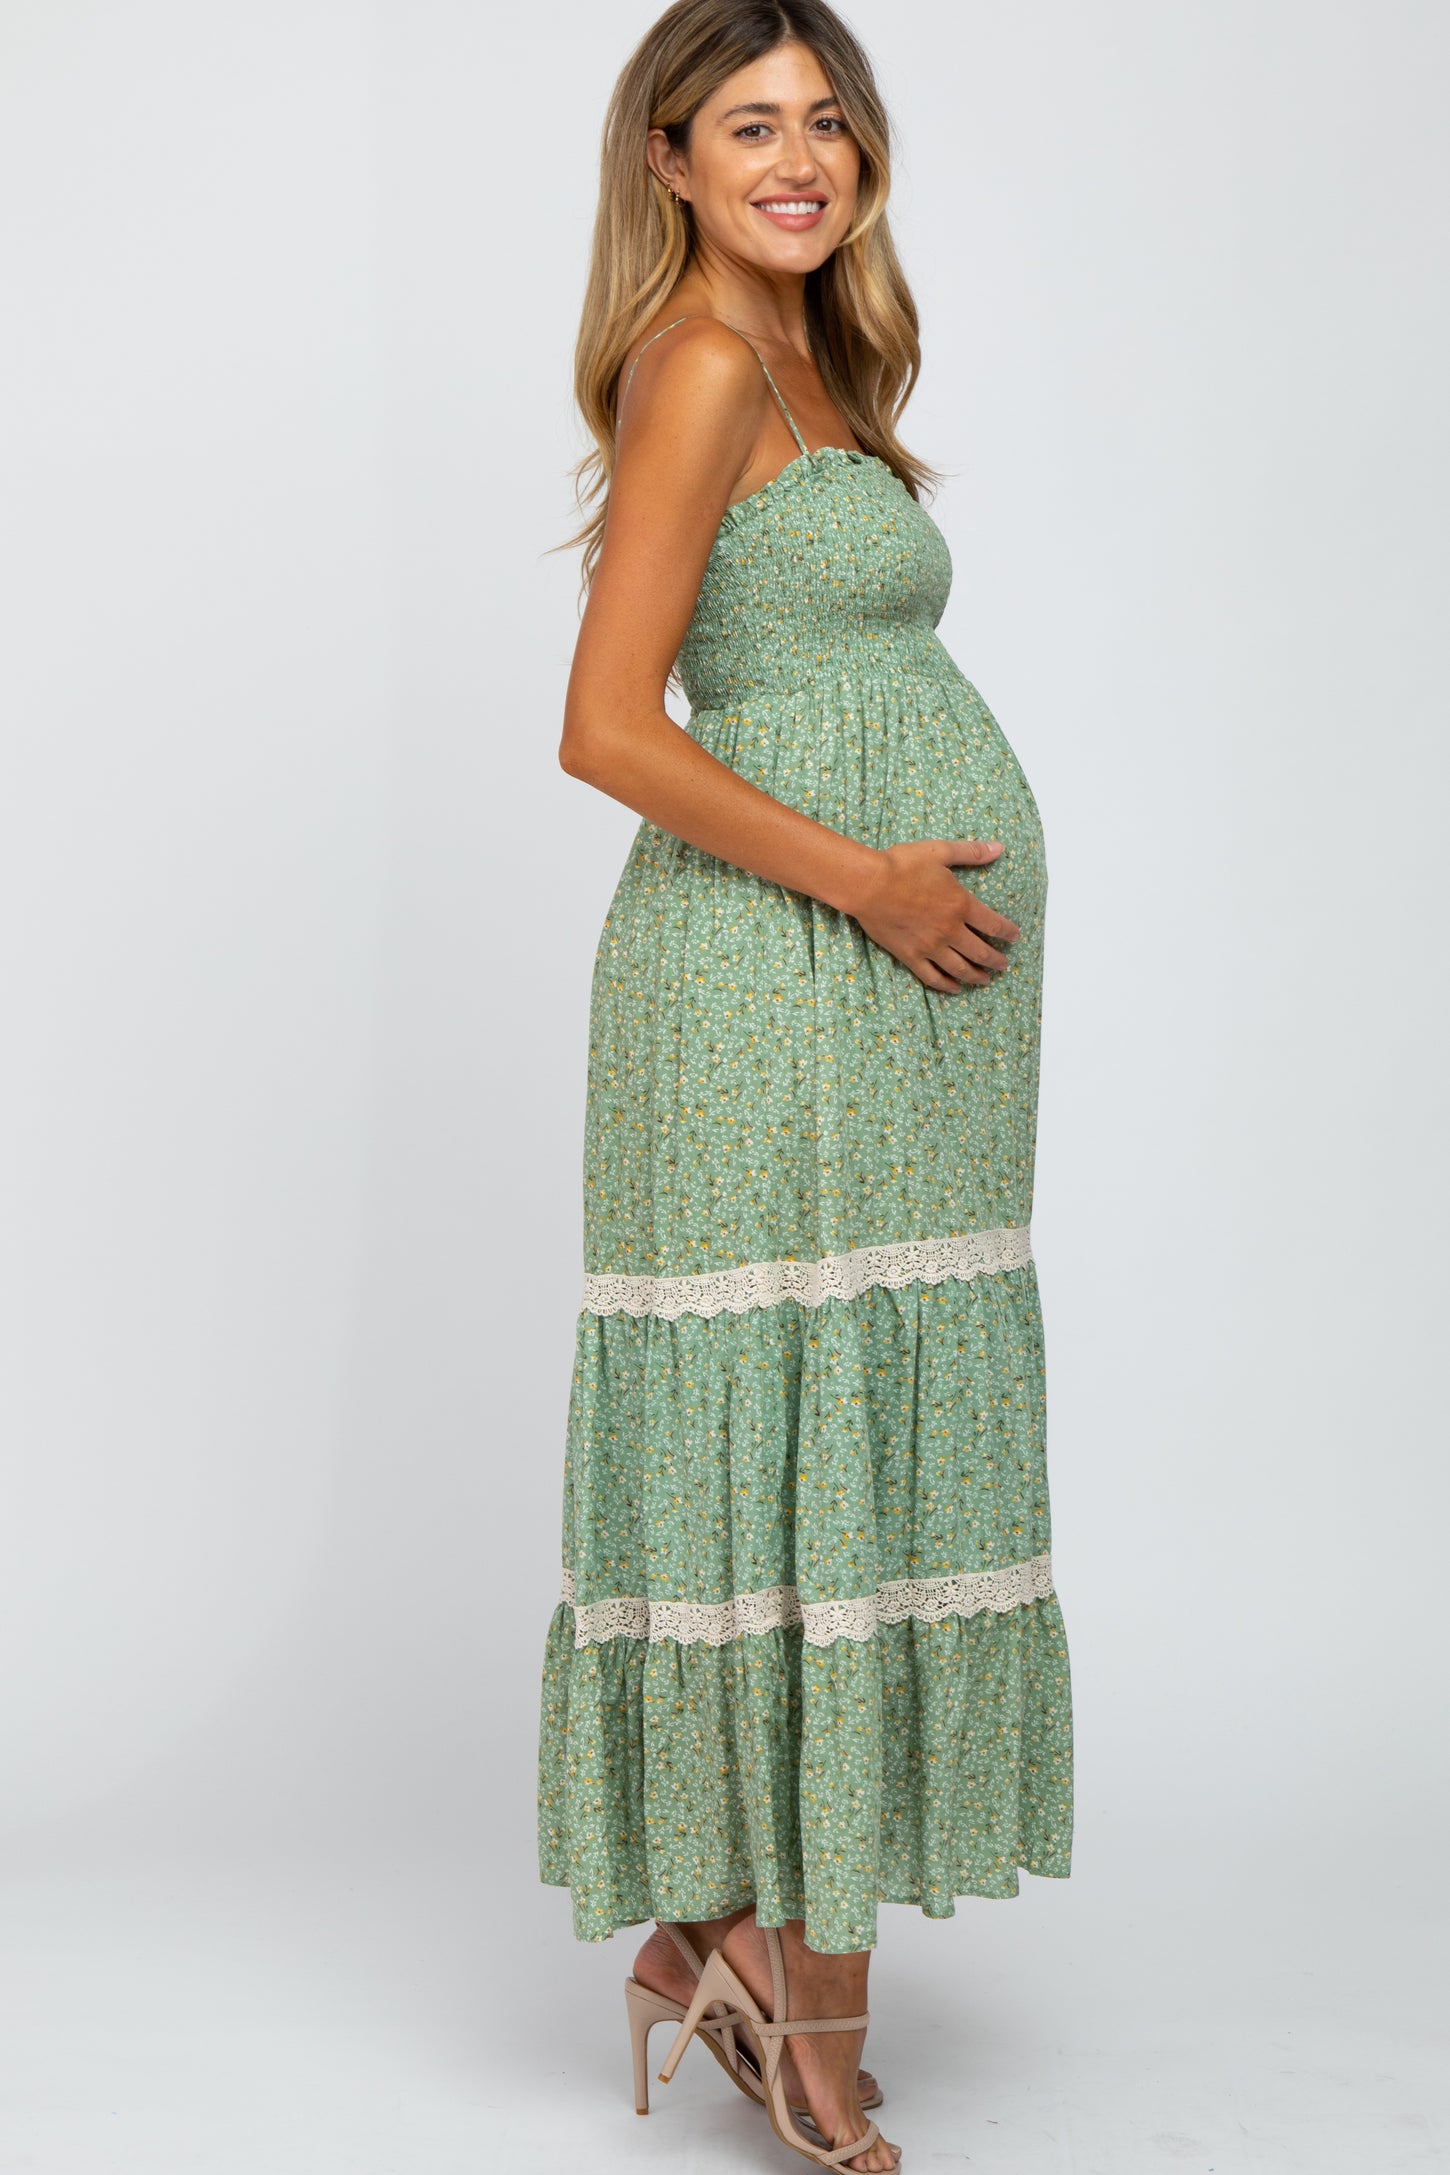 Green Floral Smocked Crochet Accent Maternity Maxi Dress